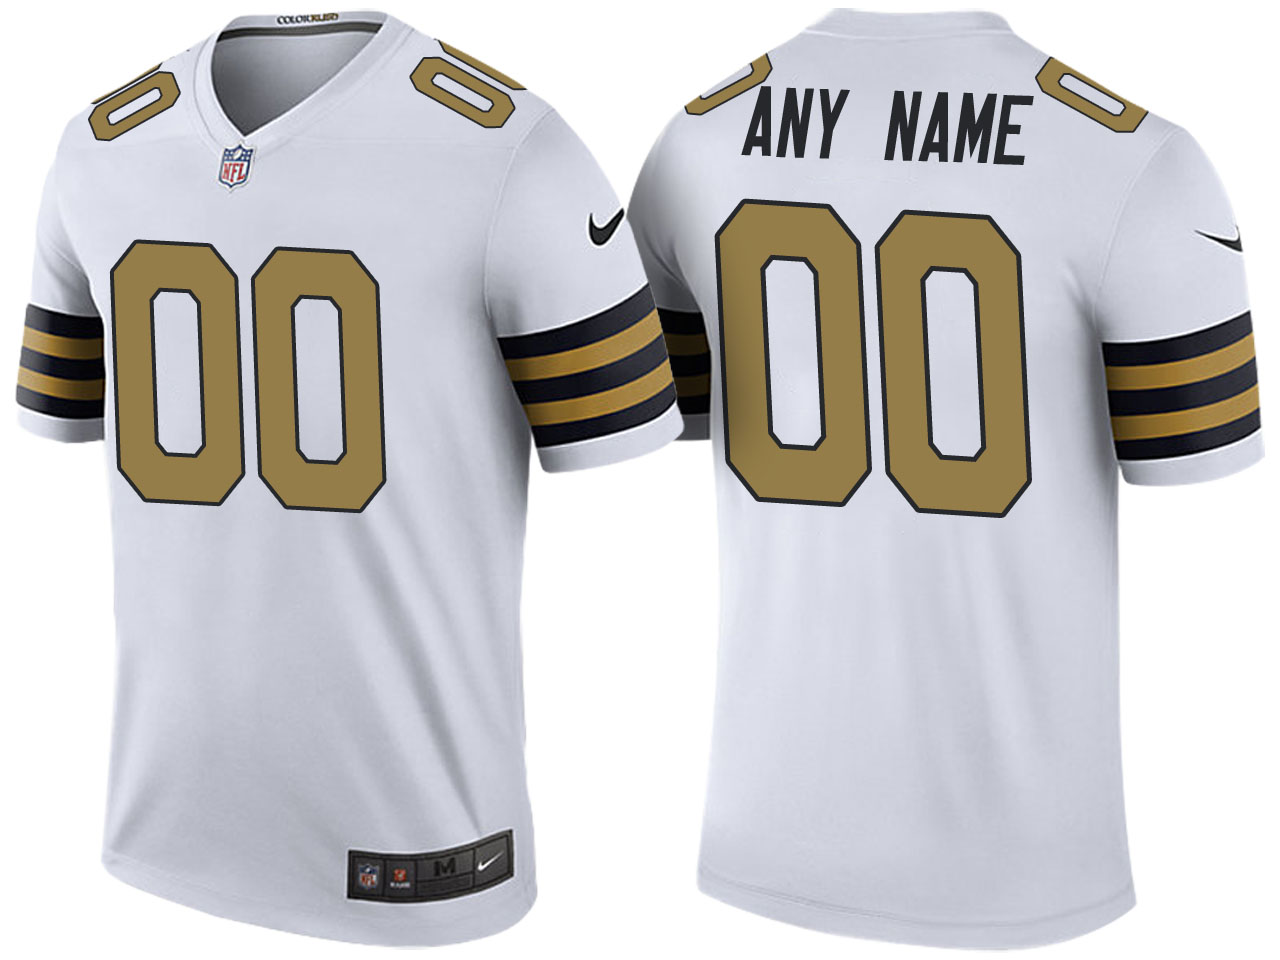 Men's Custom New Orleans Saints Nike White Color Rush Limited Adults Personal Football Jersey